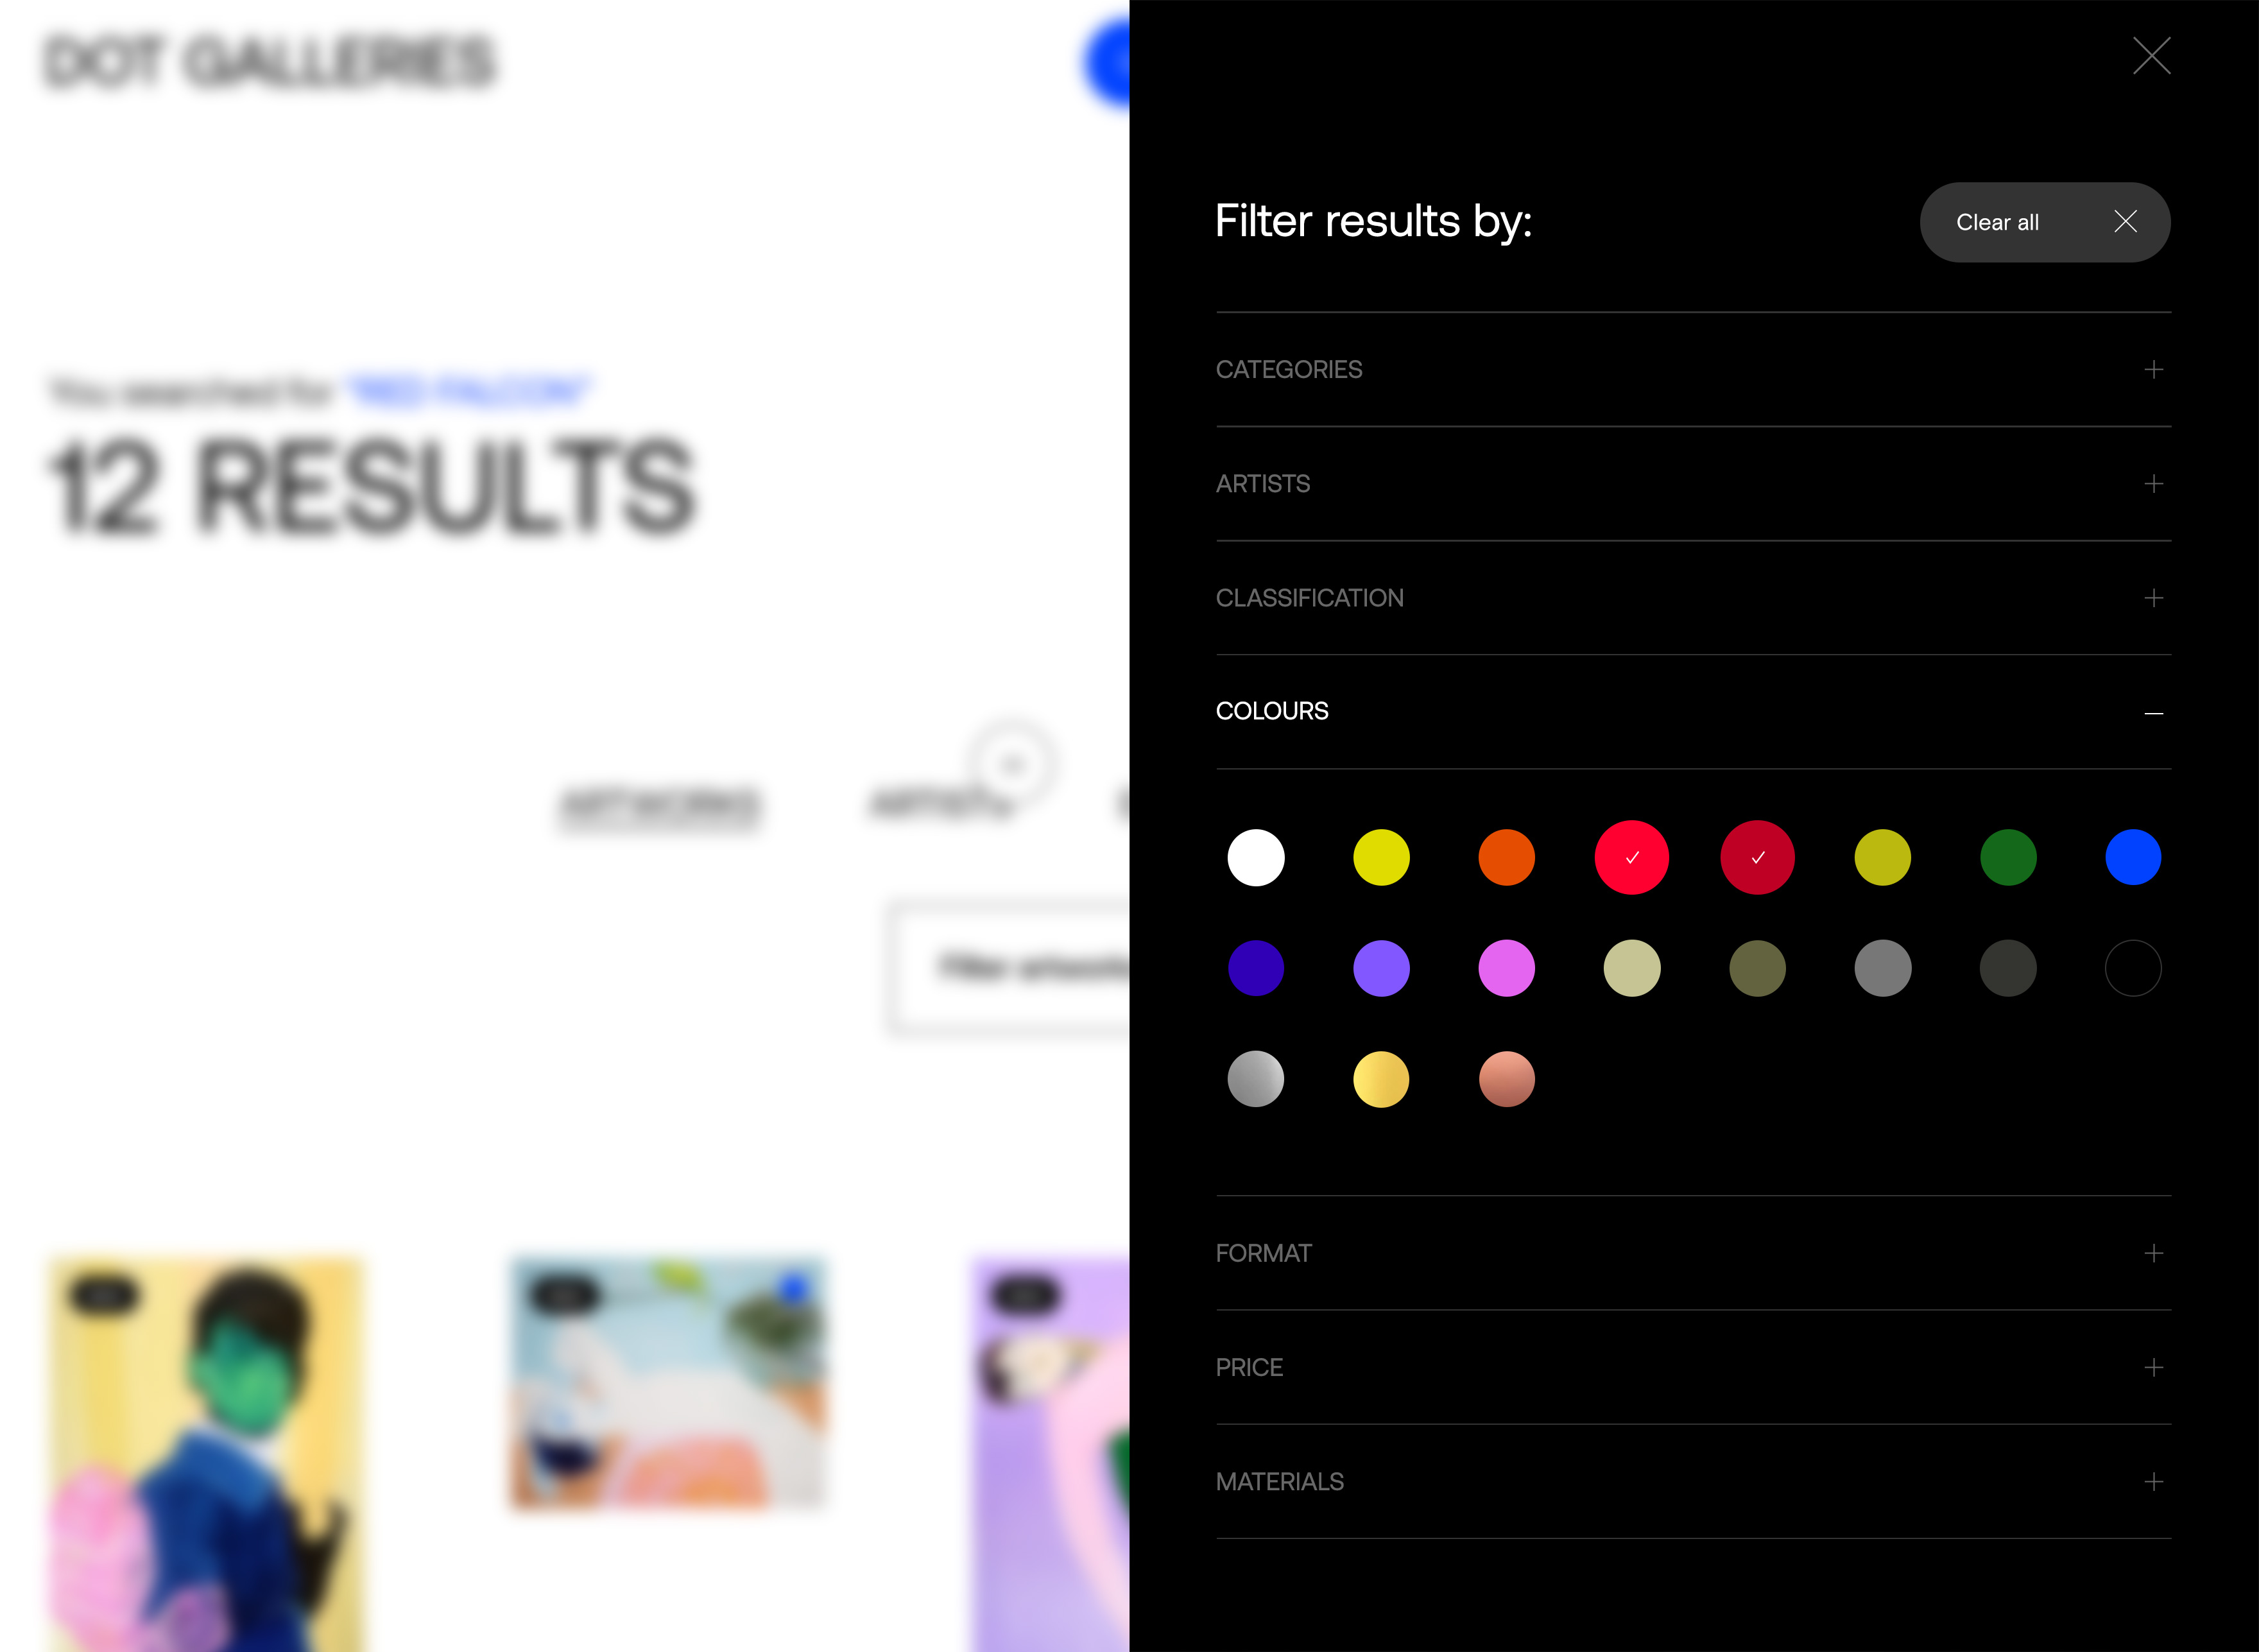 dot galleries website design search filters kommigraphics